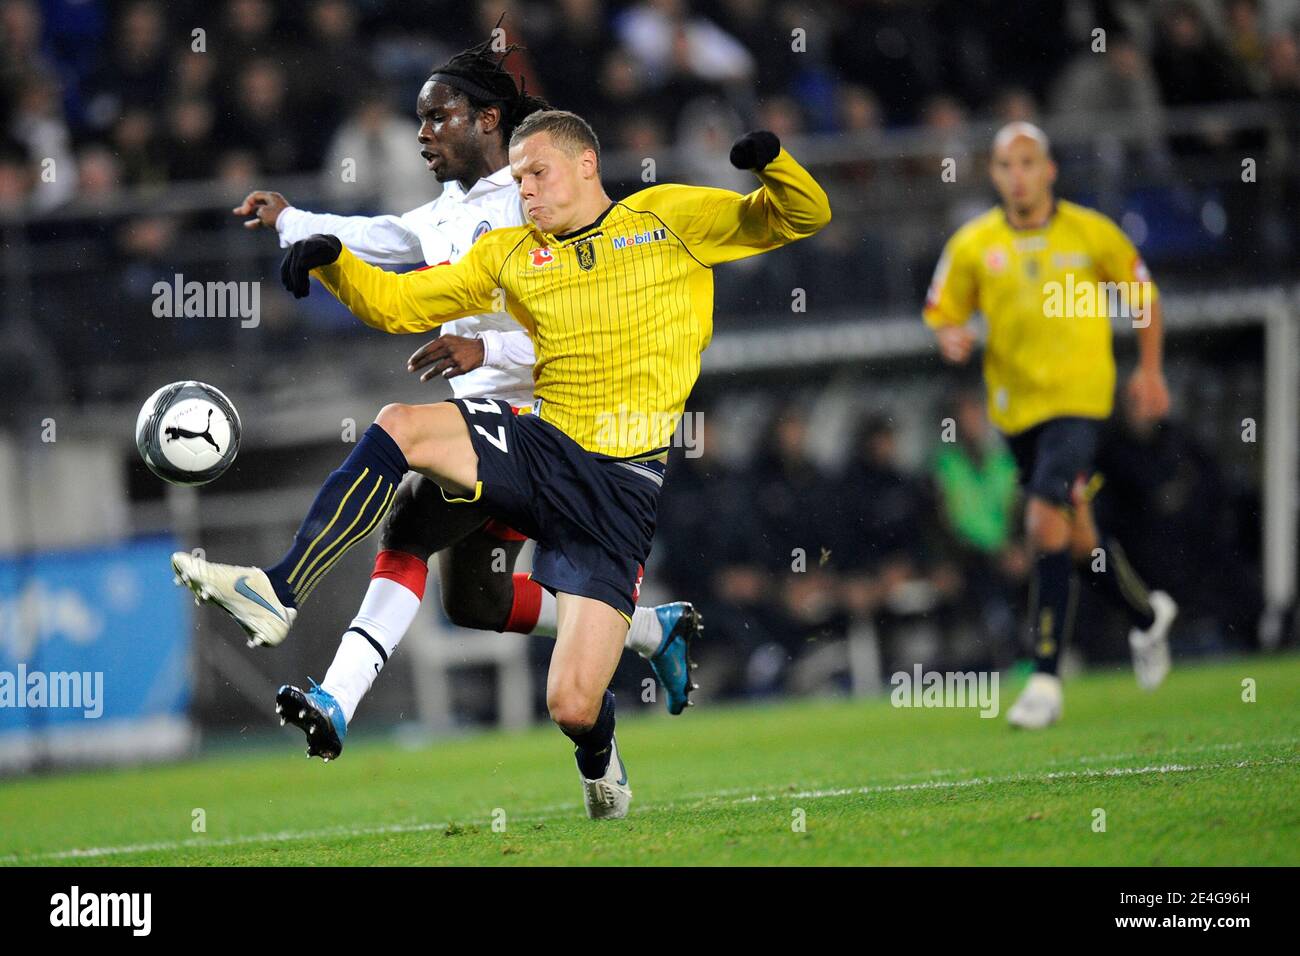 PSG's Peguy Luyindula during the French first League soccer match, FC Sochaux vs Paris Saint Germain in Sochaux,France on November 1st, 2009. PSG wins 4-1. Photo by Guillaume Ramon/Camelon/ABACAPRESS.COM Stock Photo